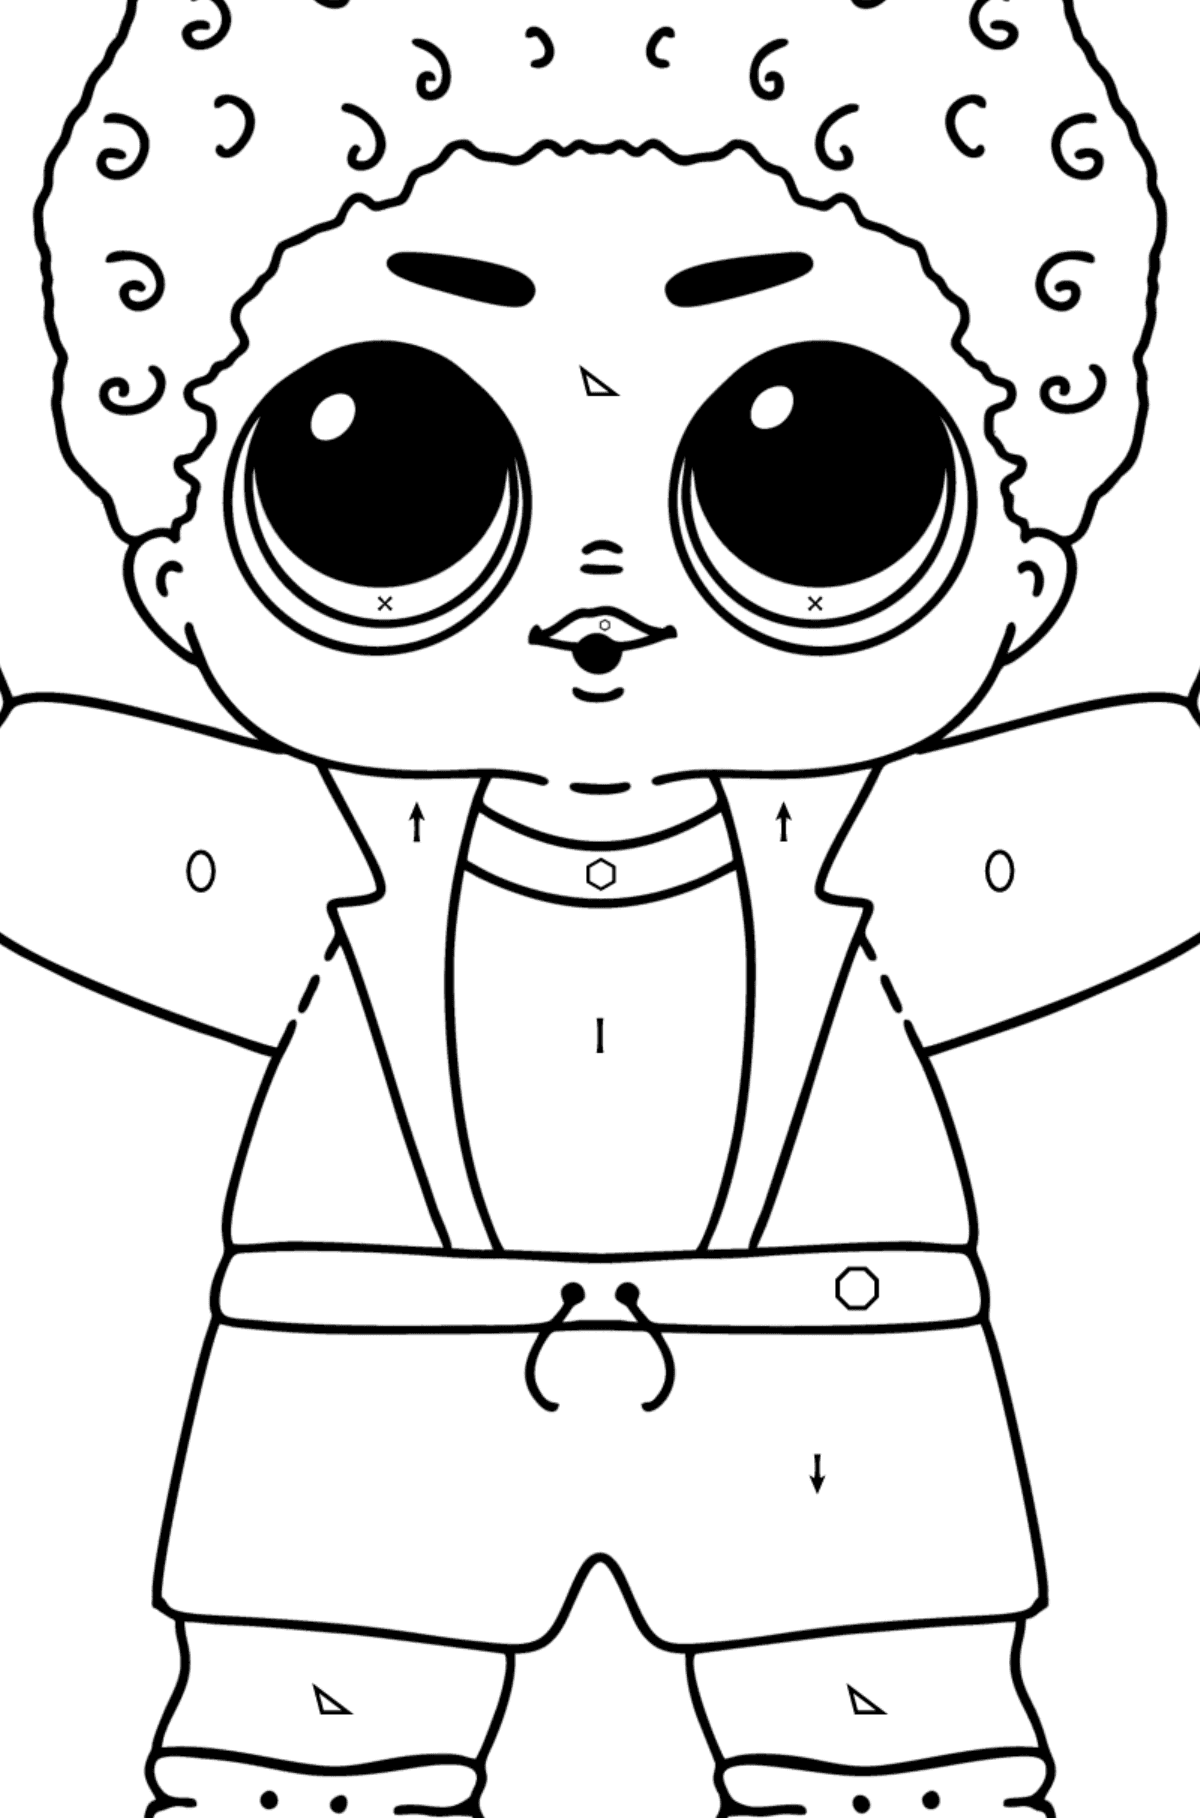 Coloring page LOL boy King - Coloring by Symbols and Geometric Shapes for Kids